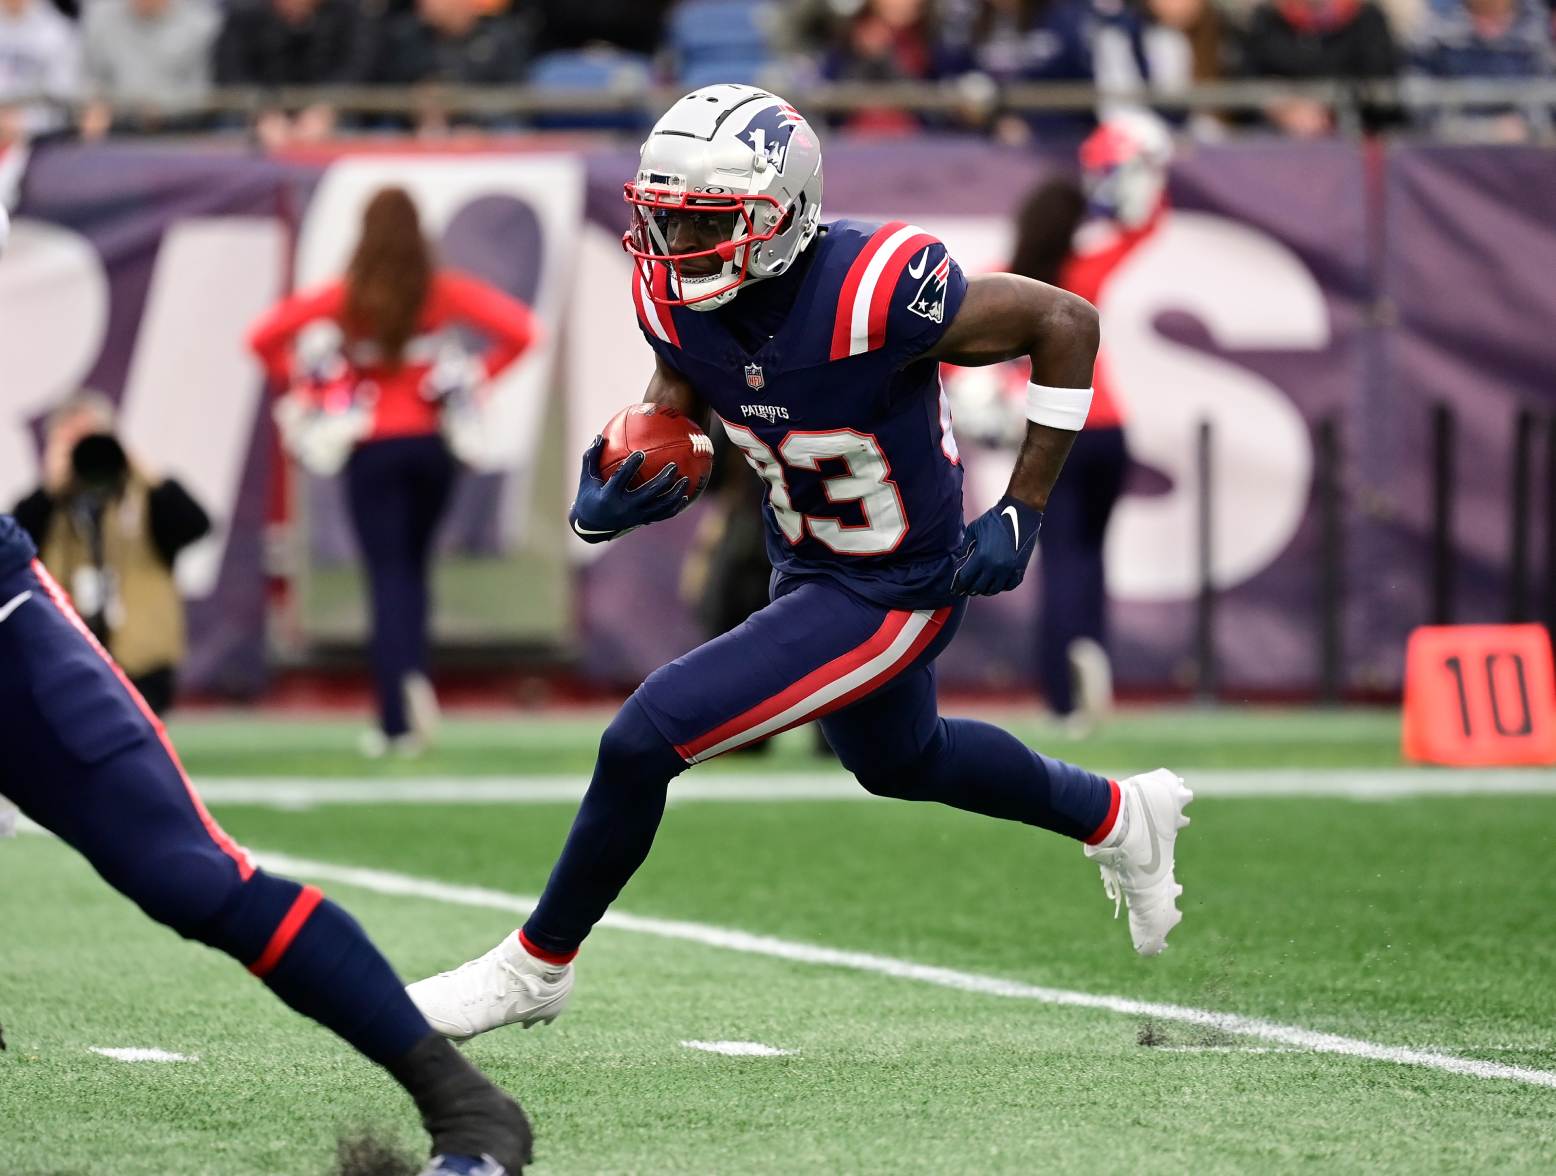 Dec 17, 2023; Foxborough, Massachusetts, USA; New England Patriots wide receiver Jalen Reagor (83) returns the ball during the first half against the Kansas City Chiefs at Gillette Stadium. Credit: Eric Canha-USA TODAY Sports